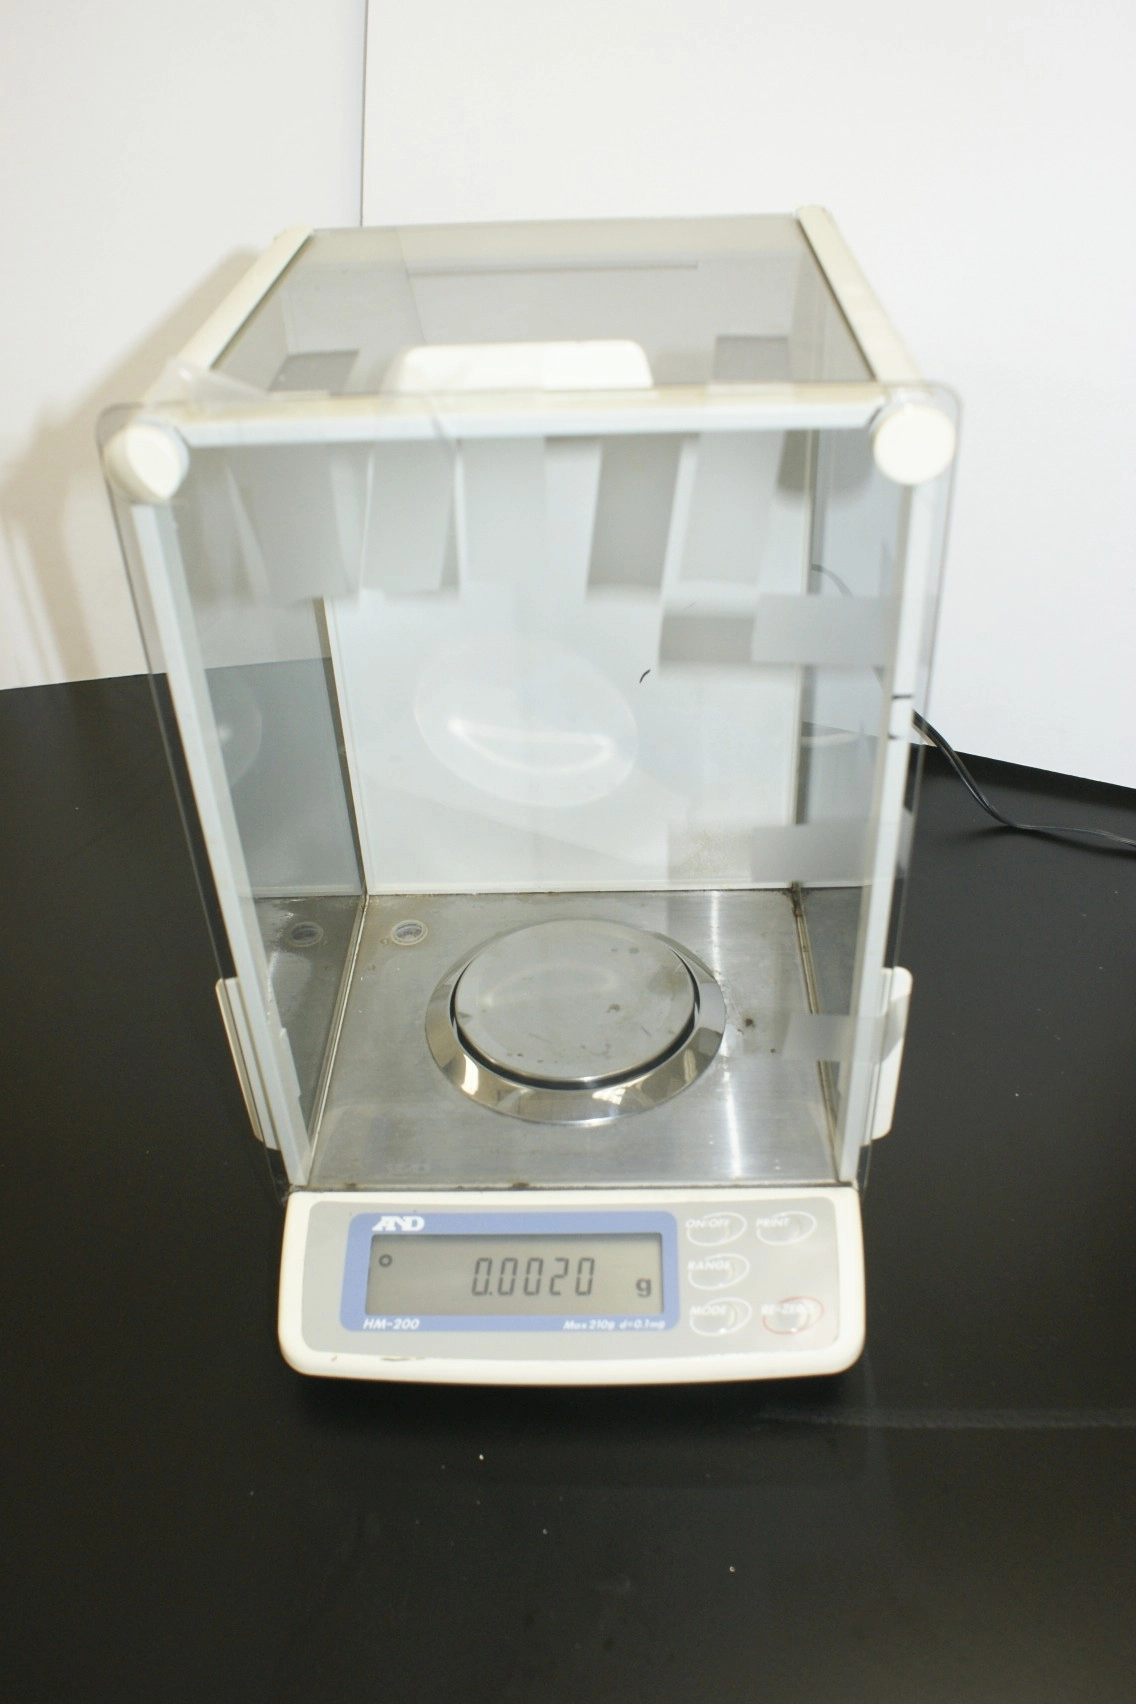 A&amp;D Weighing A&amp;D HM-200 Analytical Balance used